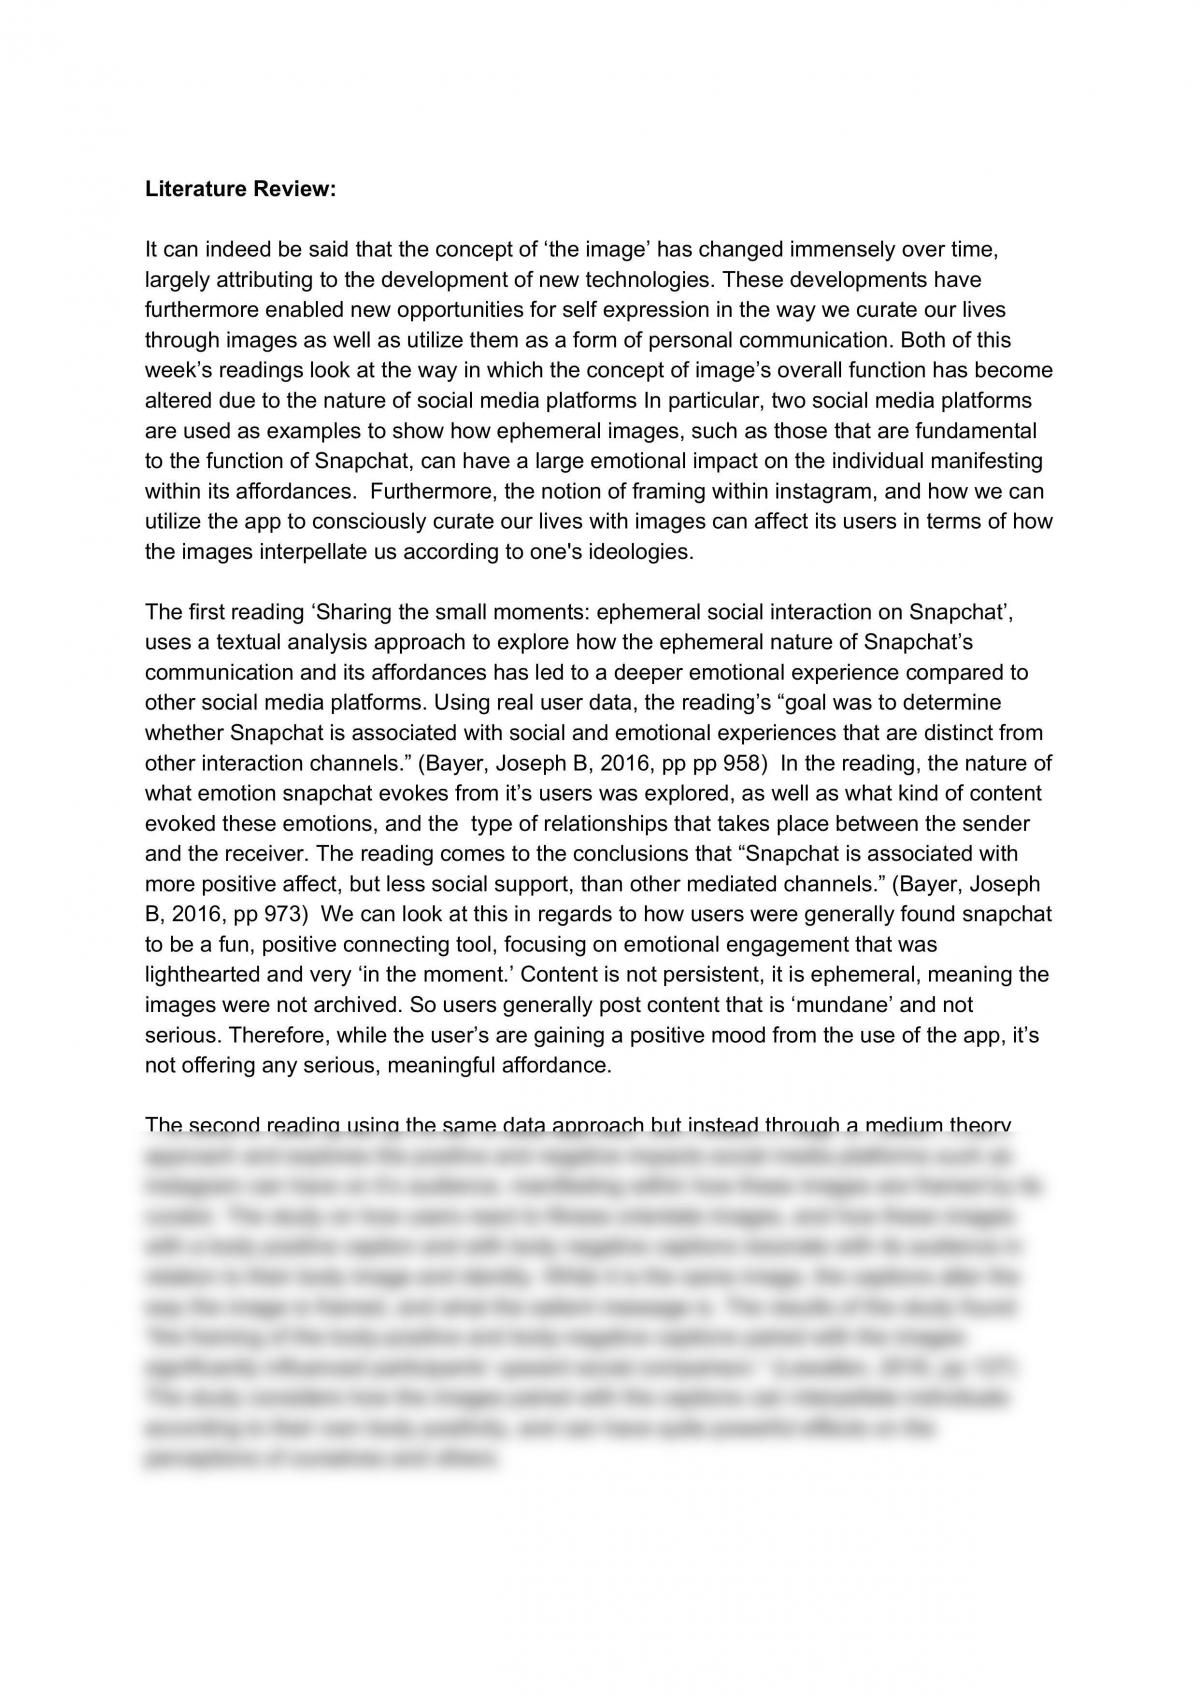 ARTS1091 Discussion Paper - Social Media and the Structuring of our Daily Lives - Page 1